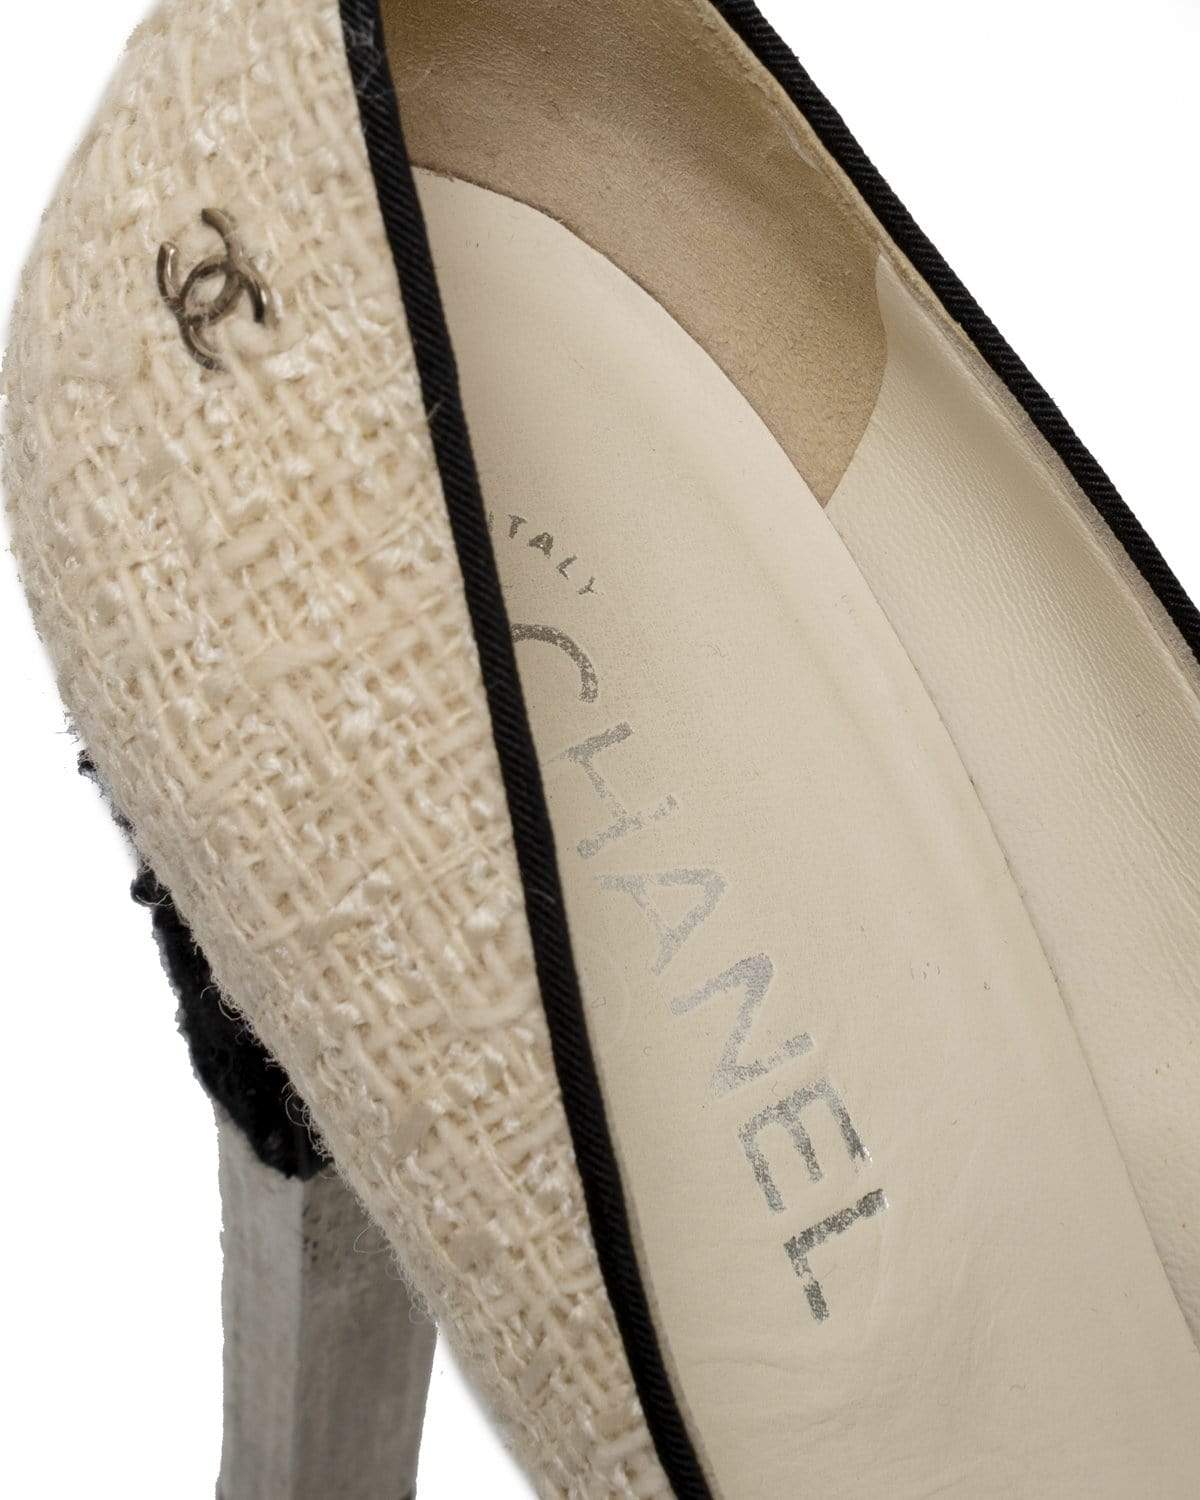 Chanel Chanel Tweed Shoes Size 39 - ADC1128